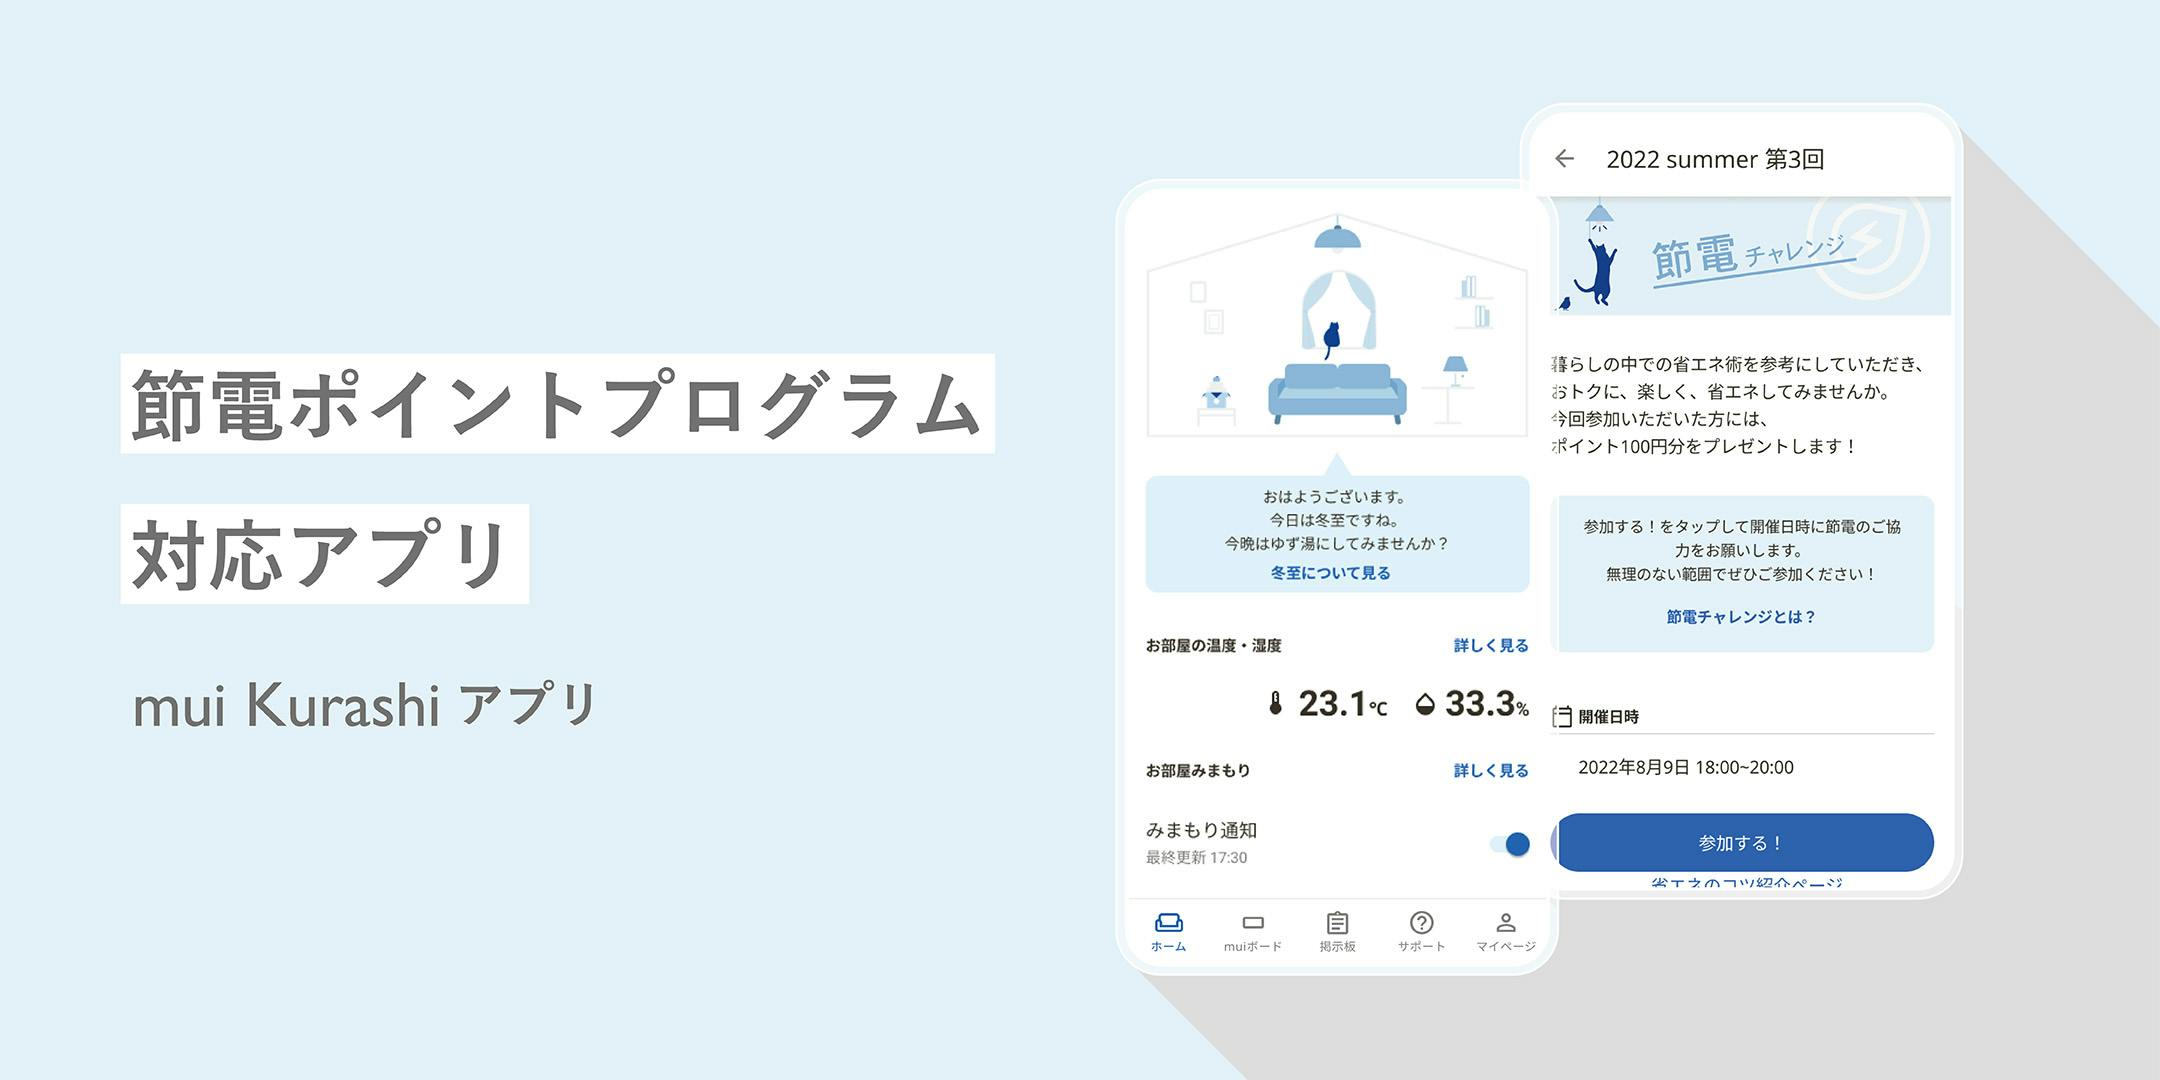 mui Lab provides electric power companies with “mui Kurashi (=Life) app. " which provides energy saving points to consumers in collaboration with giftee, Inc.